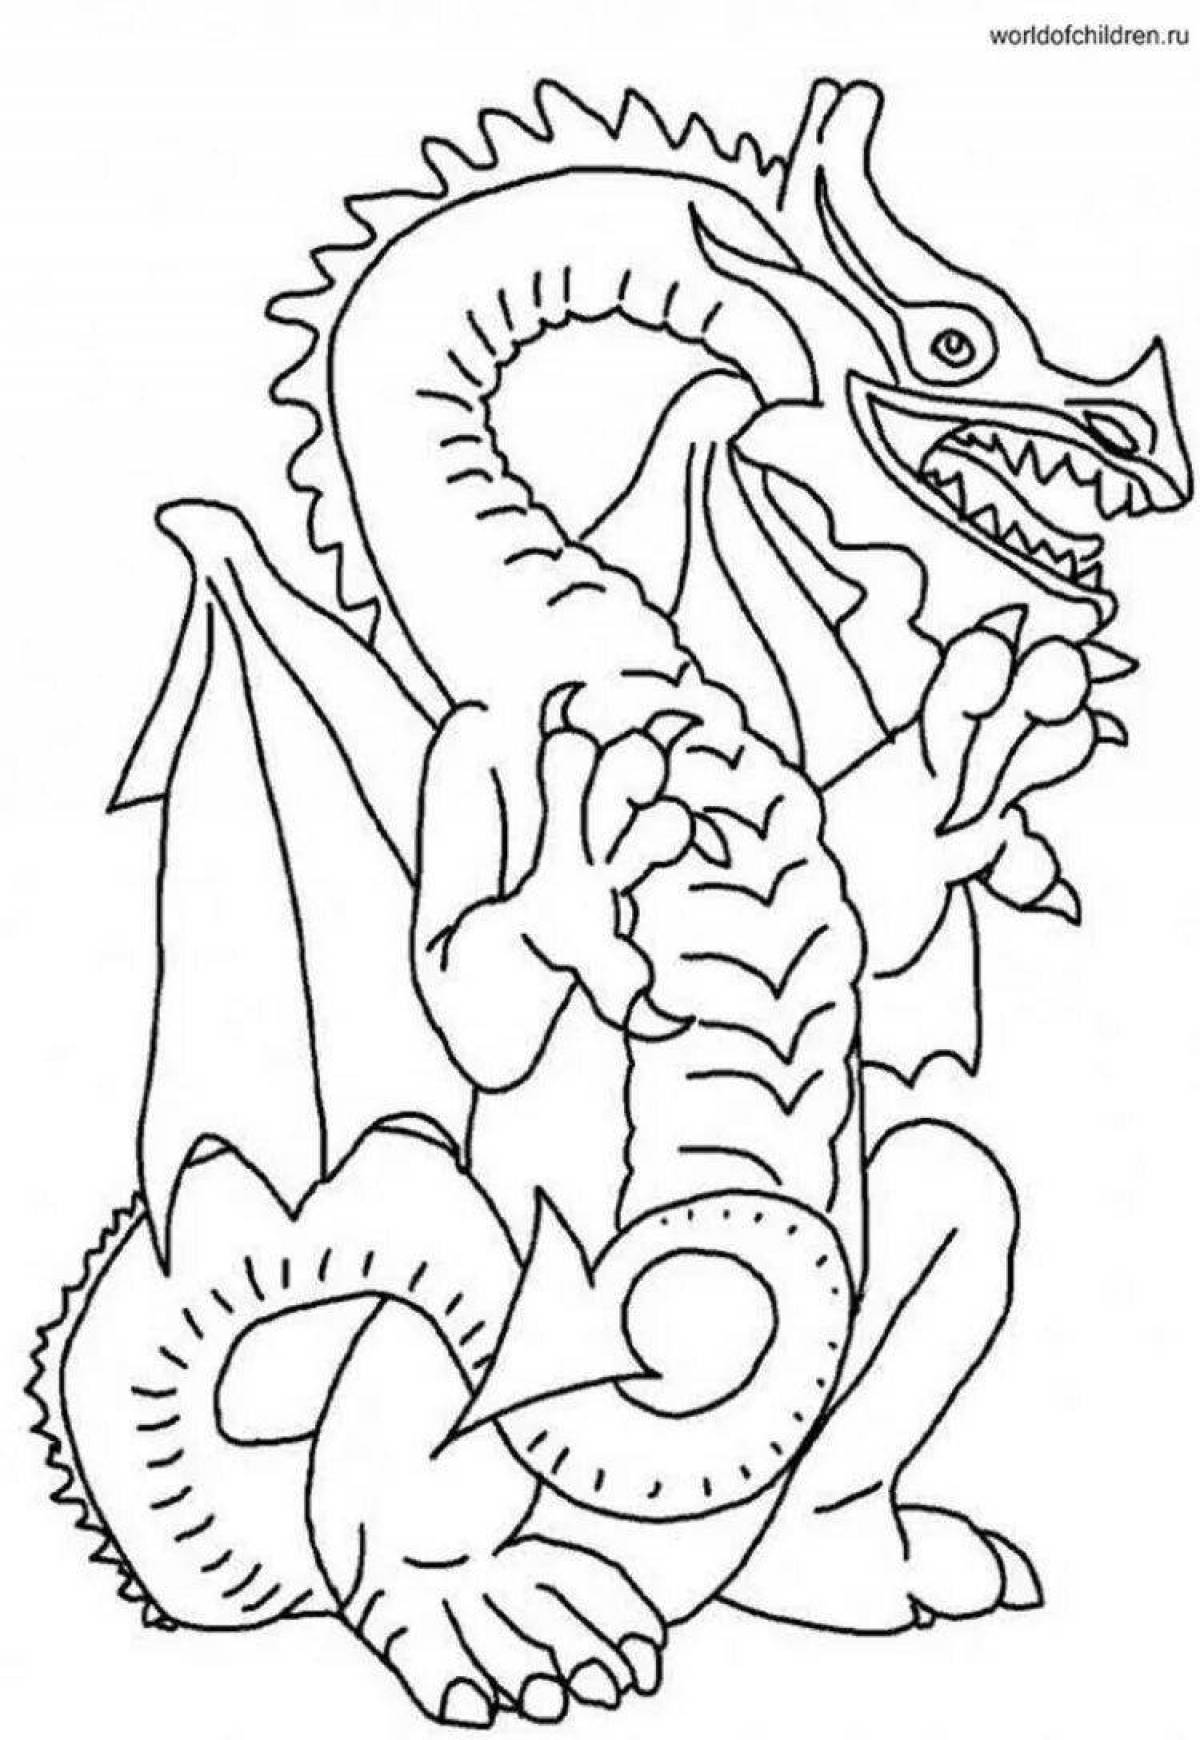 Majestic year of the dragon coloring page